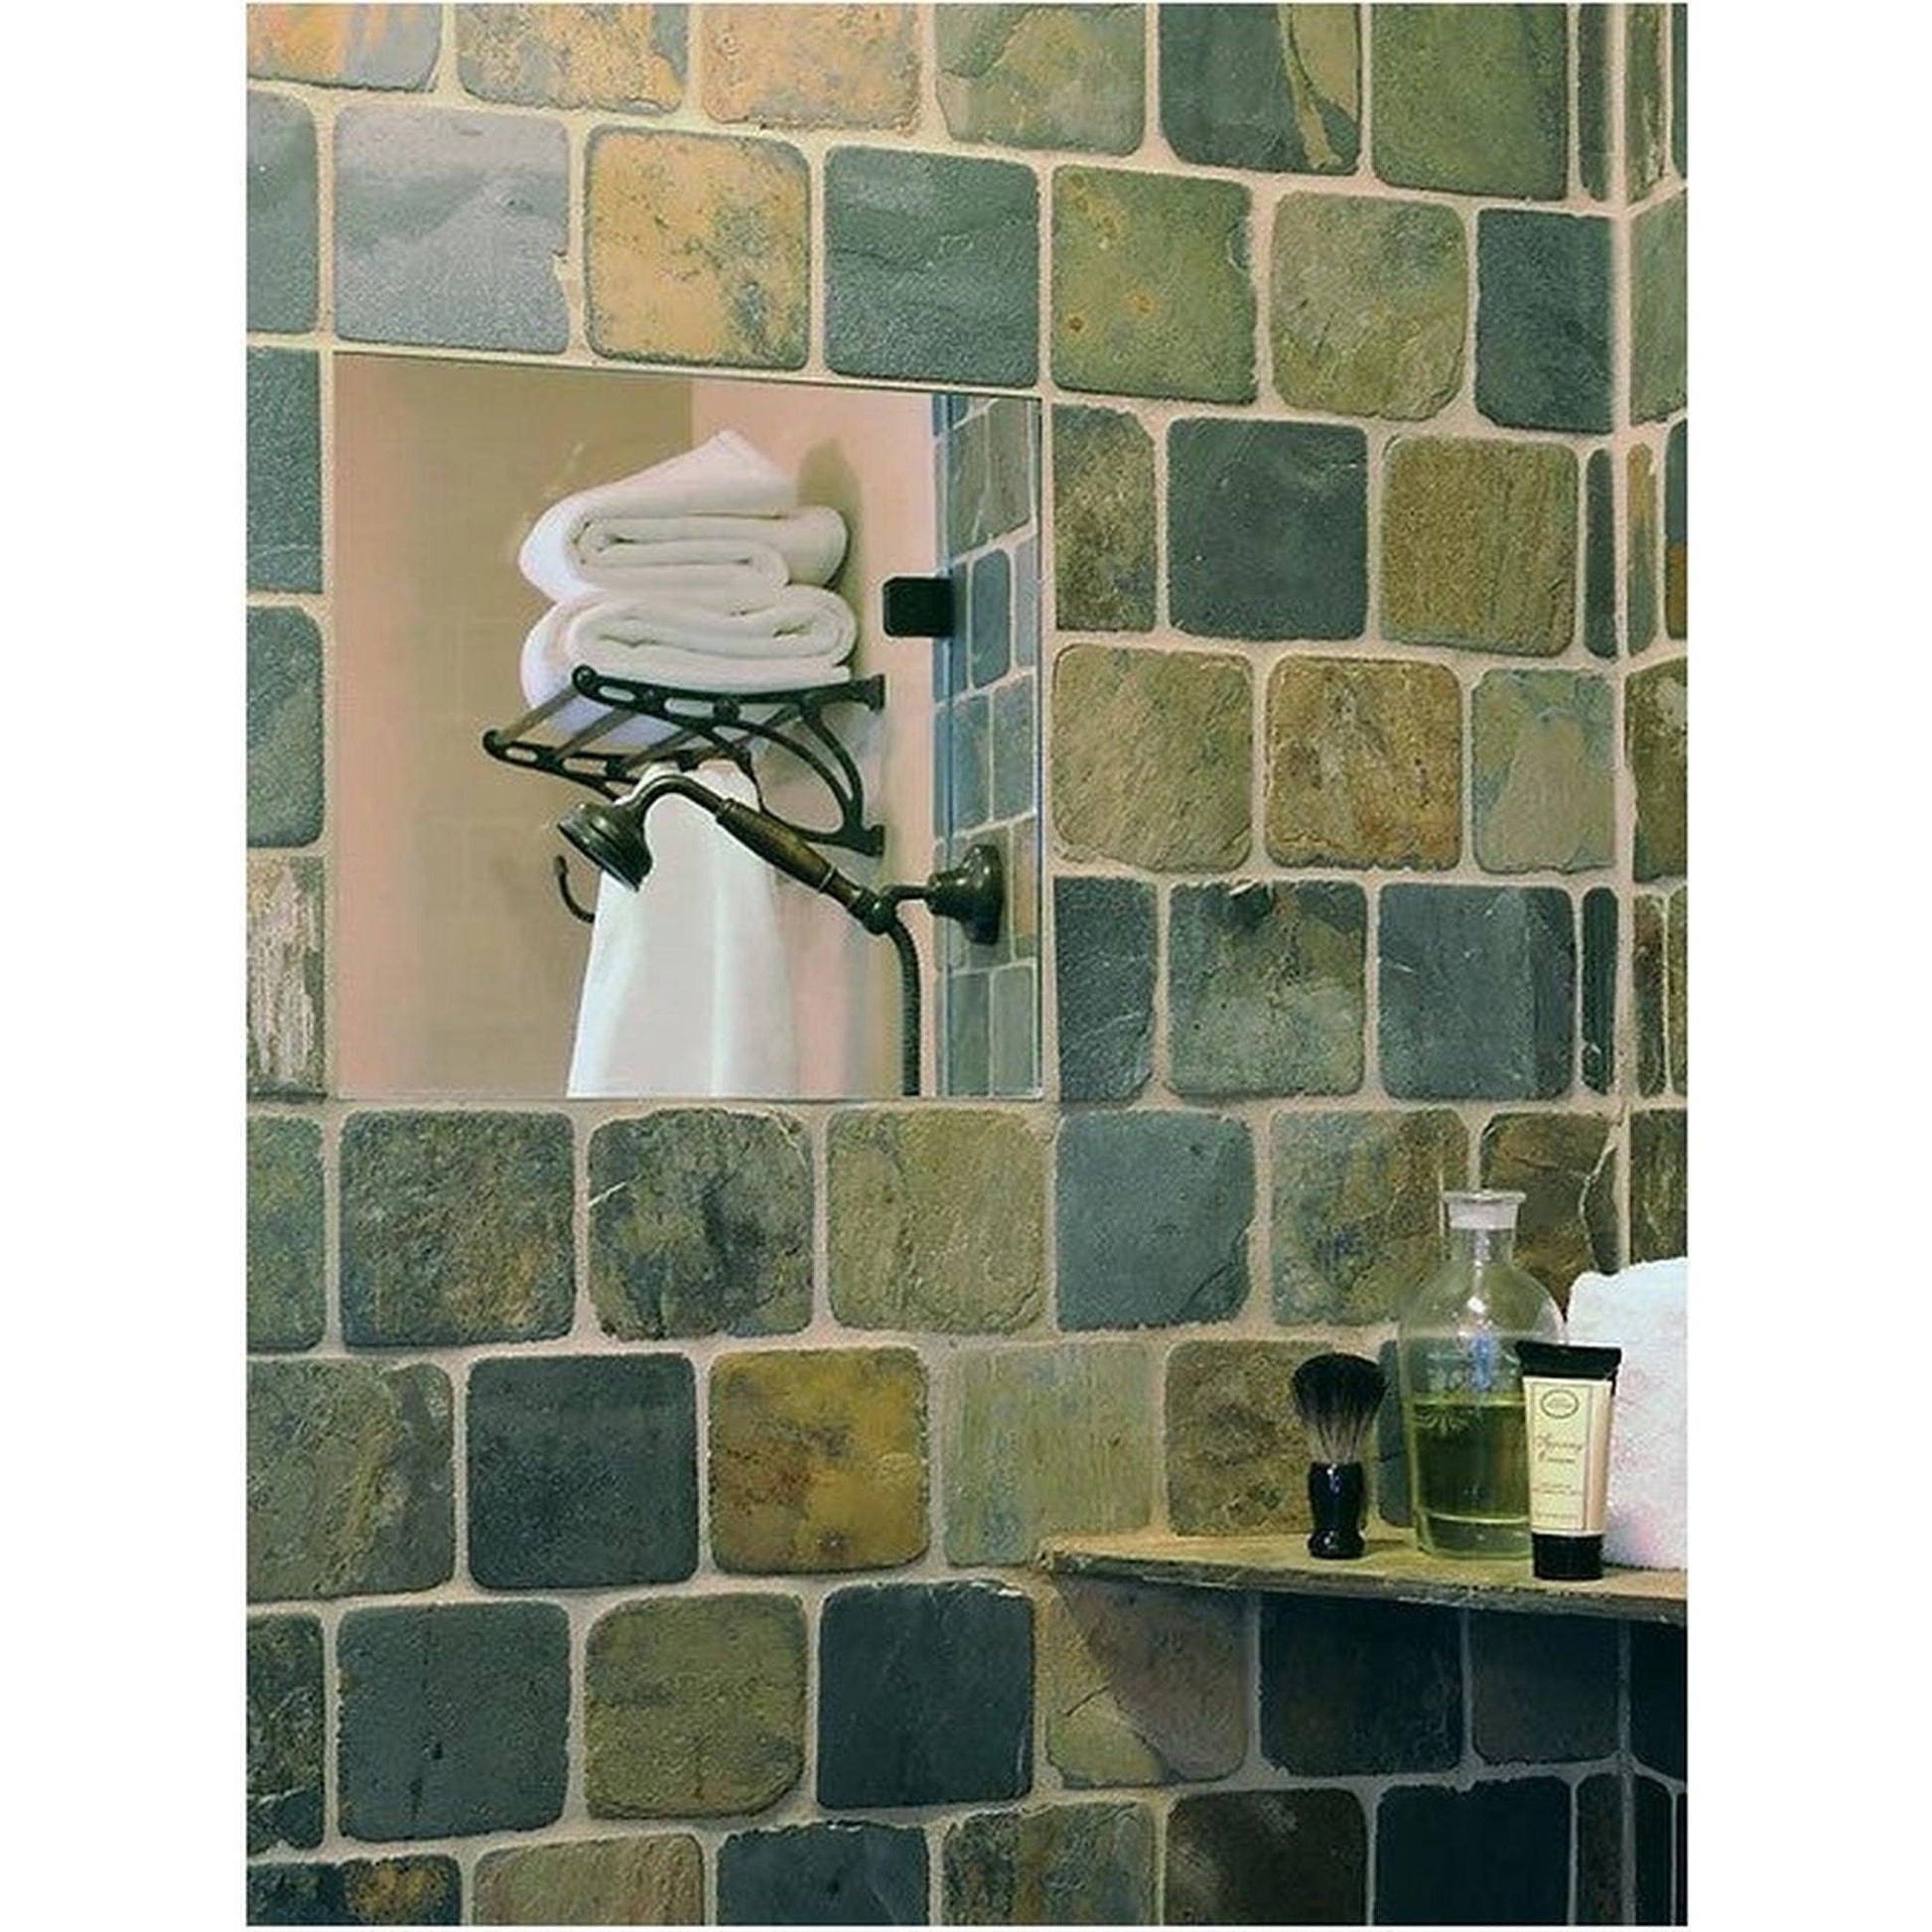 ClearMirror 16" x 16" Fog-Free Wall-Mounted Shower Mirror With Heating Pad